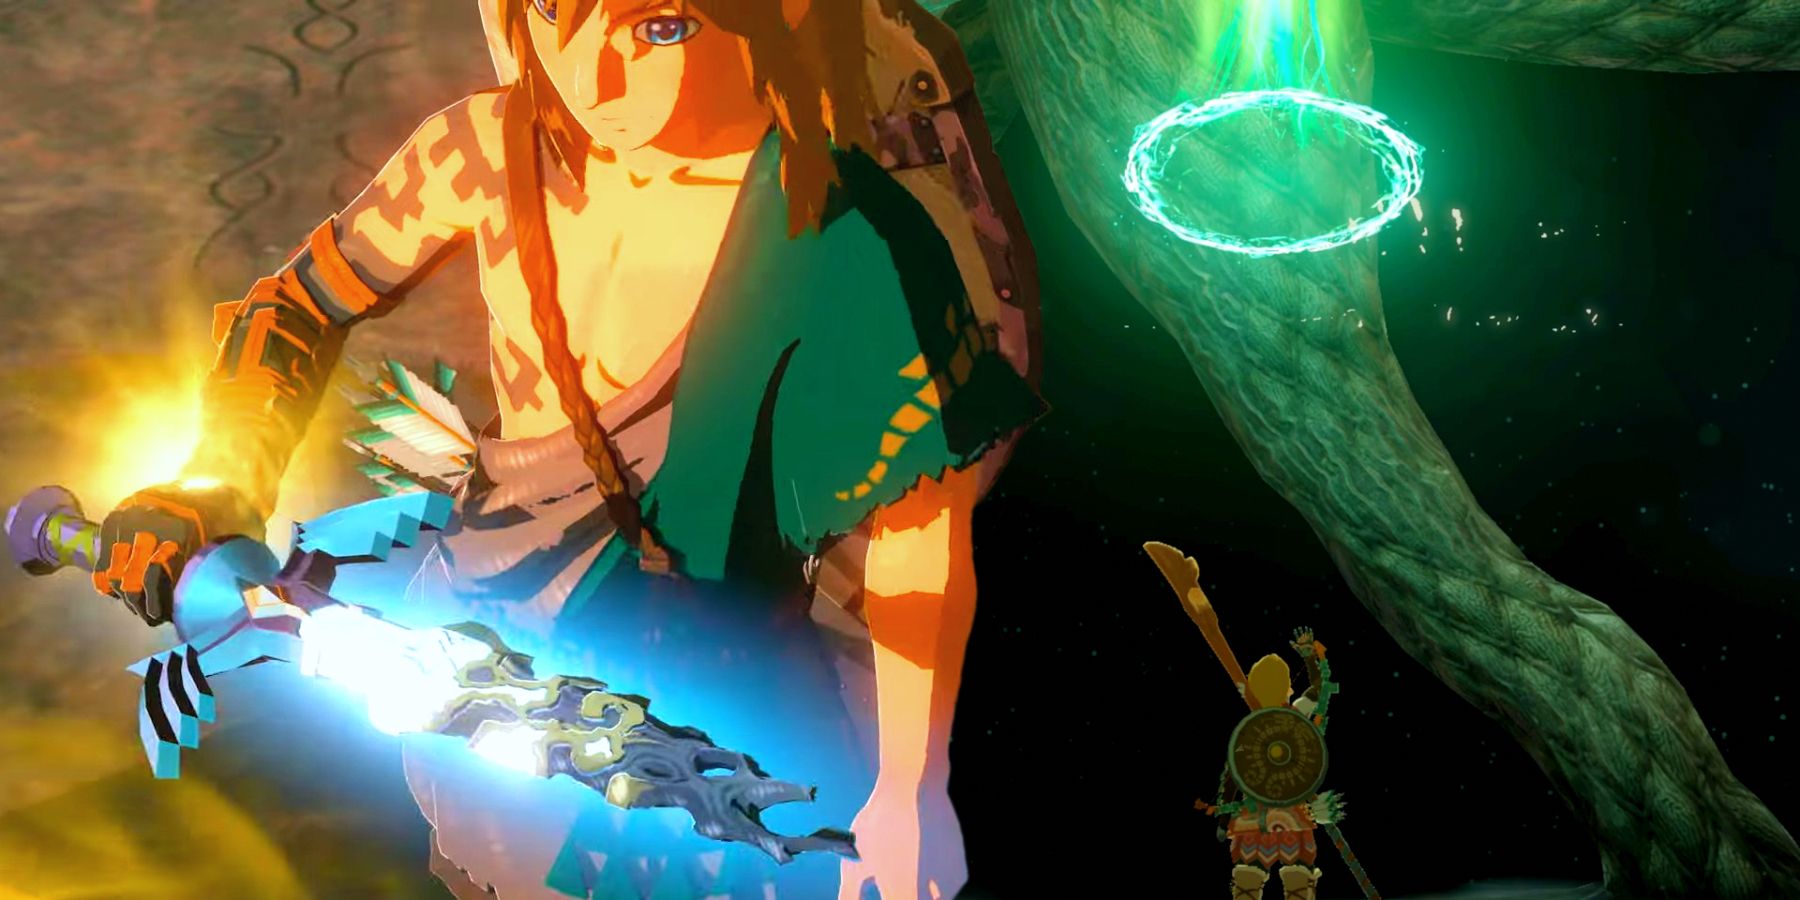 Link holding a decayed Master Sword on the left side of the image, and Link standing under the green ring of a Lightroot on the right side.